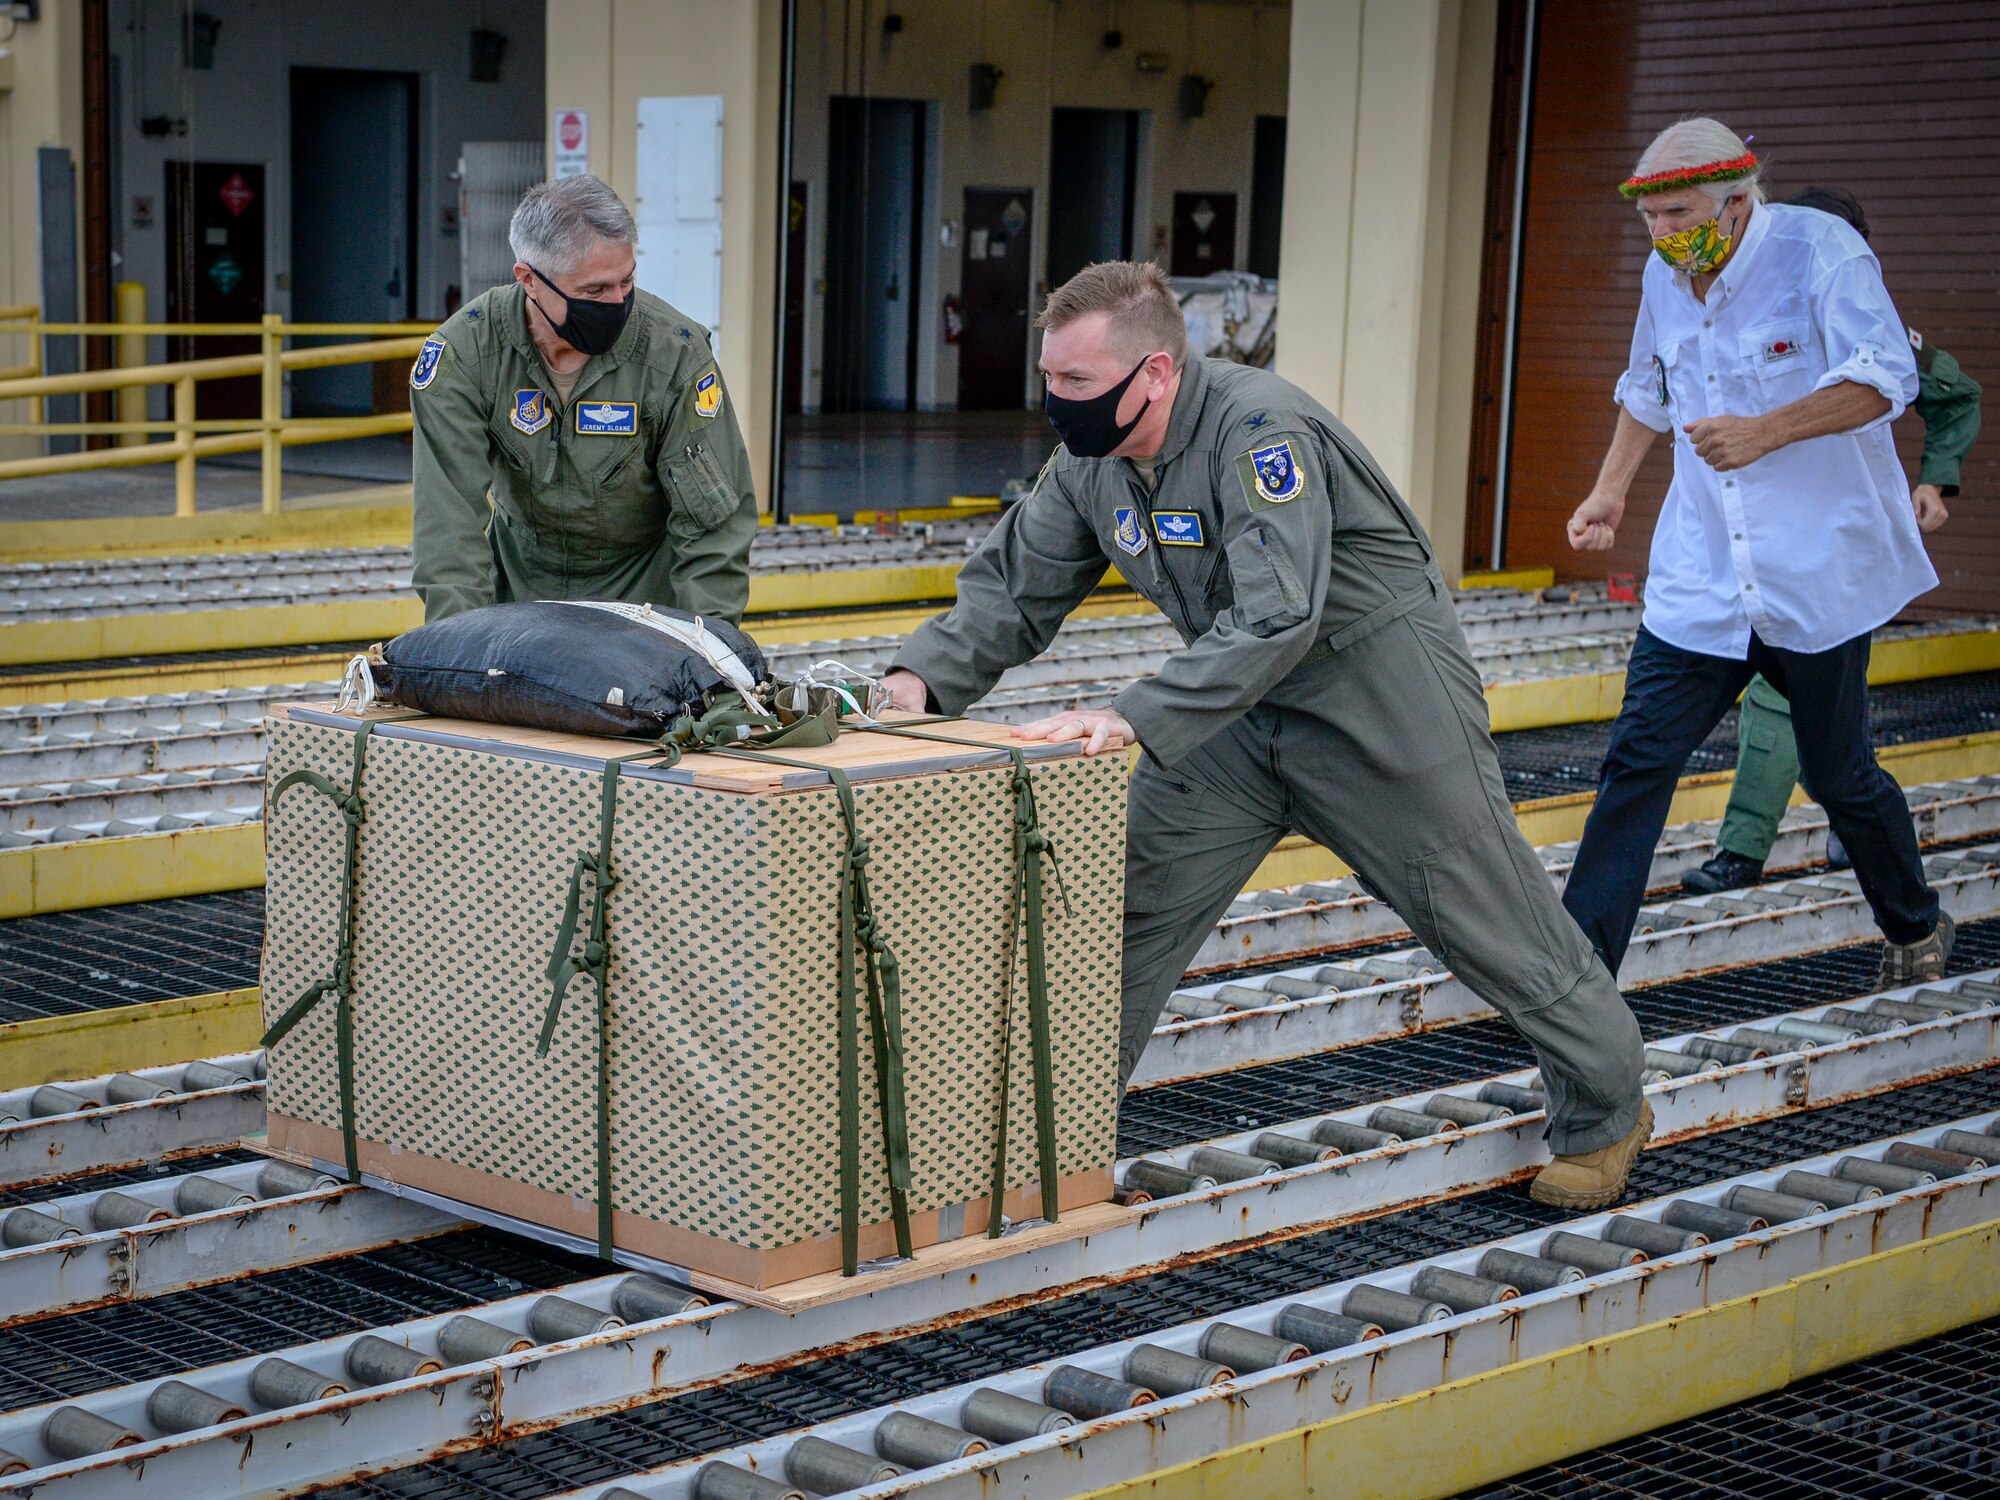 Brig. Gen. Jeremy Sloane, 36th Wing commander, and Col. Kevin Martin, 374th Operations Group commander, make the ceremonial “push” of the first pallet to kick-off Operation Christmas Drop at Andersen Air Force Base, Guam, Dec. 7, 2020.